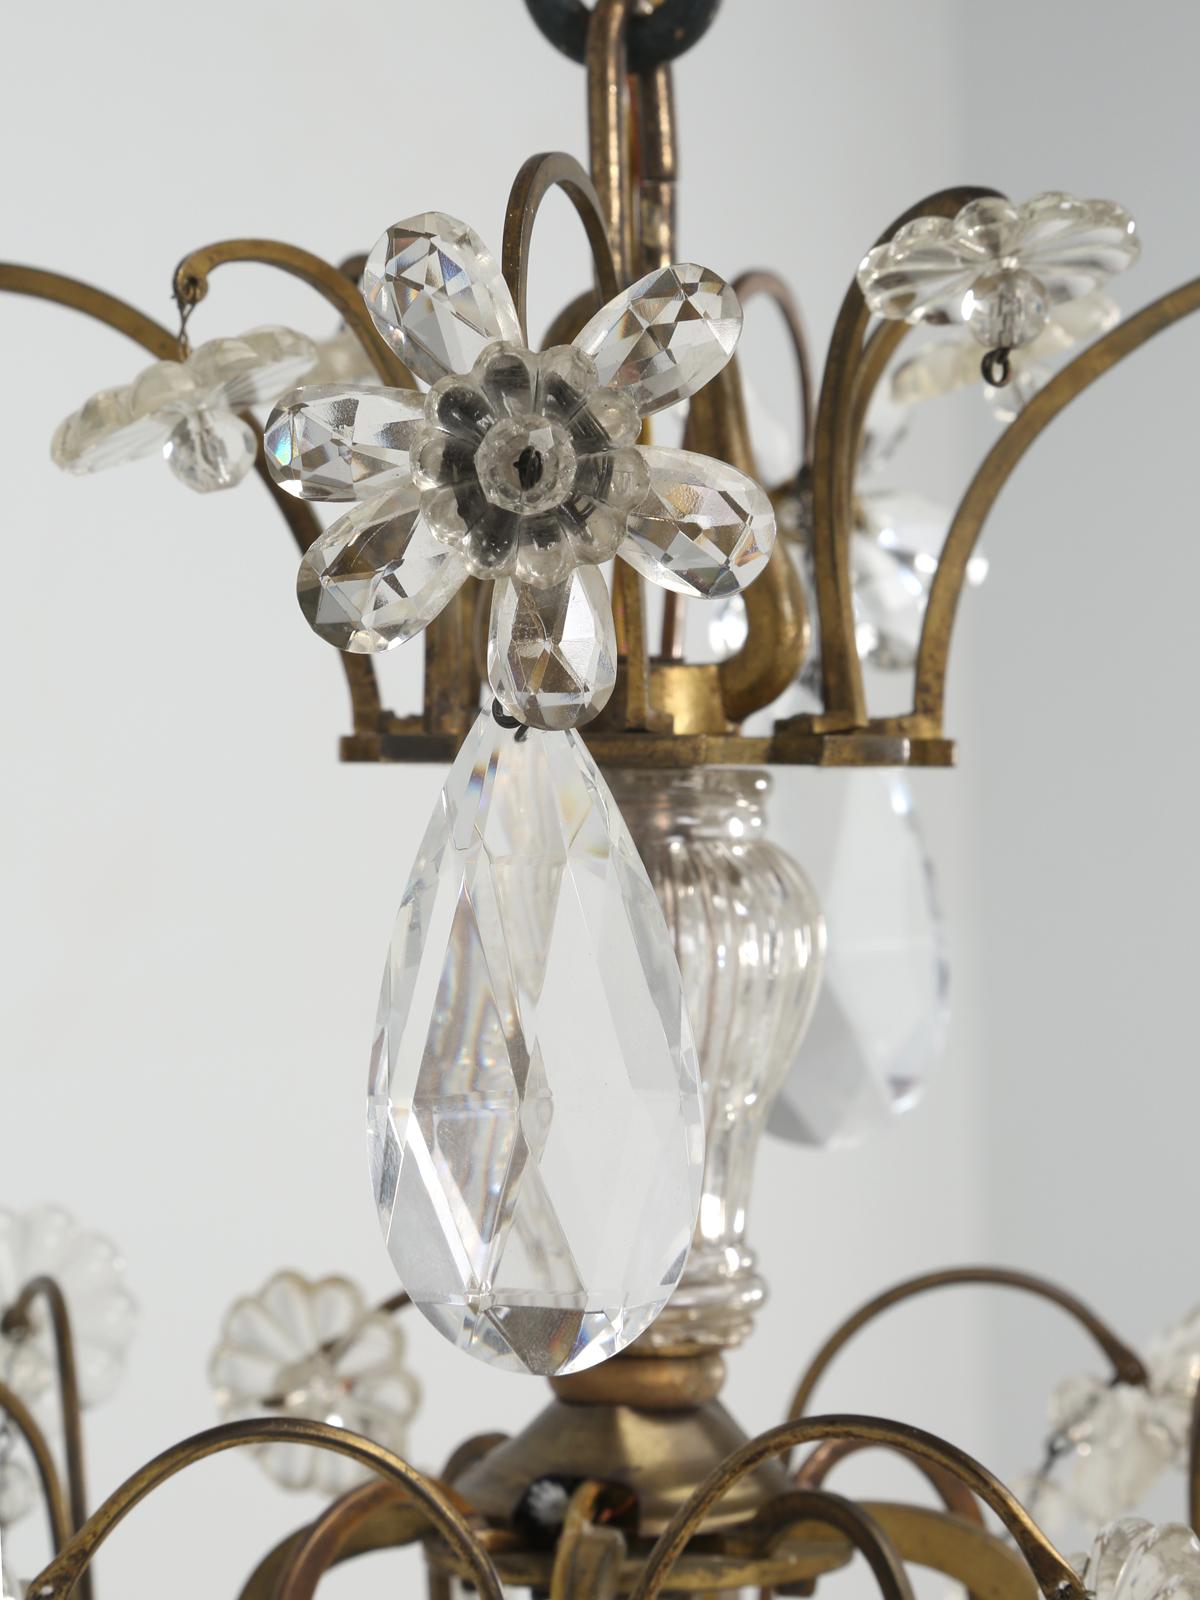 Vintage French Maison Jansen-style Bronze and Crystal 8-light Chandelier, featuring crystal links, pendants, faceted prisms, rosettes and flowers. Re-wired and tested to use immediately. Beautifully made and clearly a step above most of the French